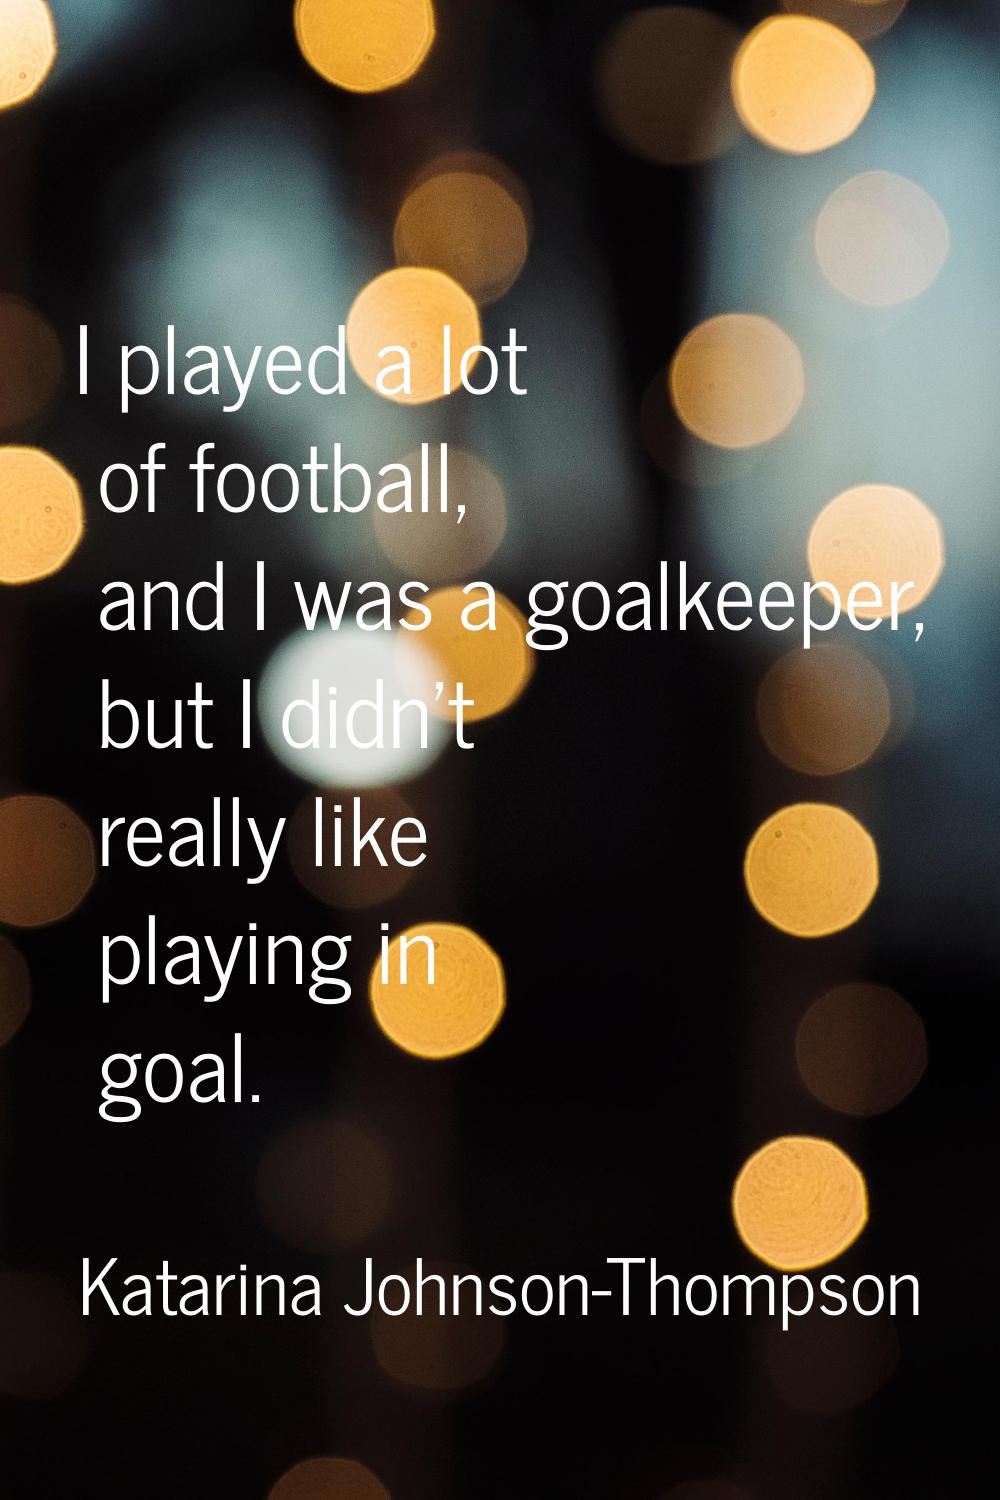 I played a lot of football, and I was a goalkeeper, but I didn't really like playing in goal.